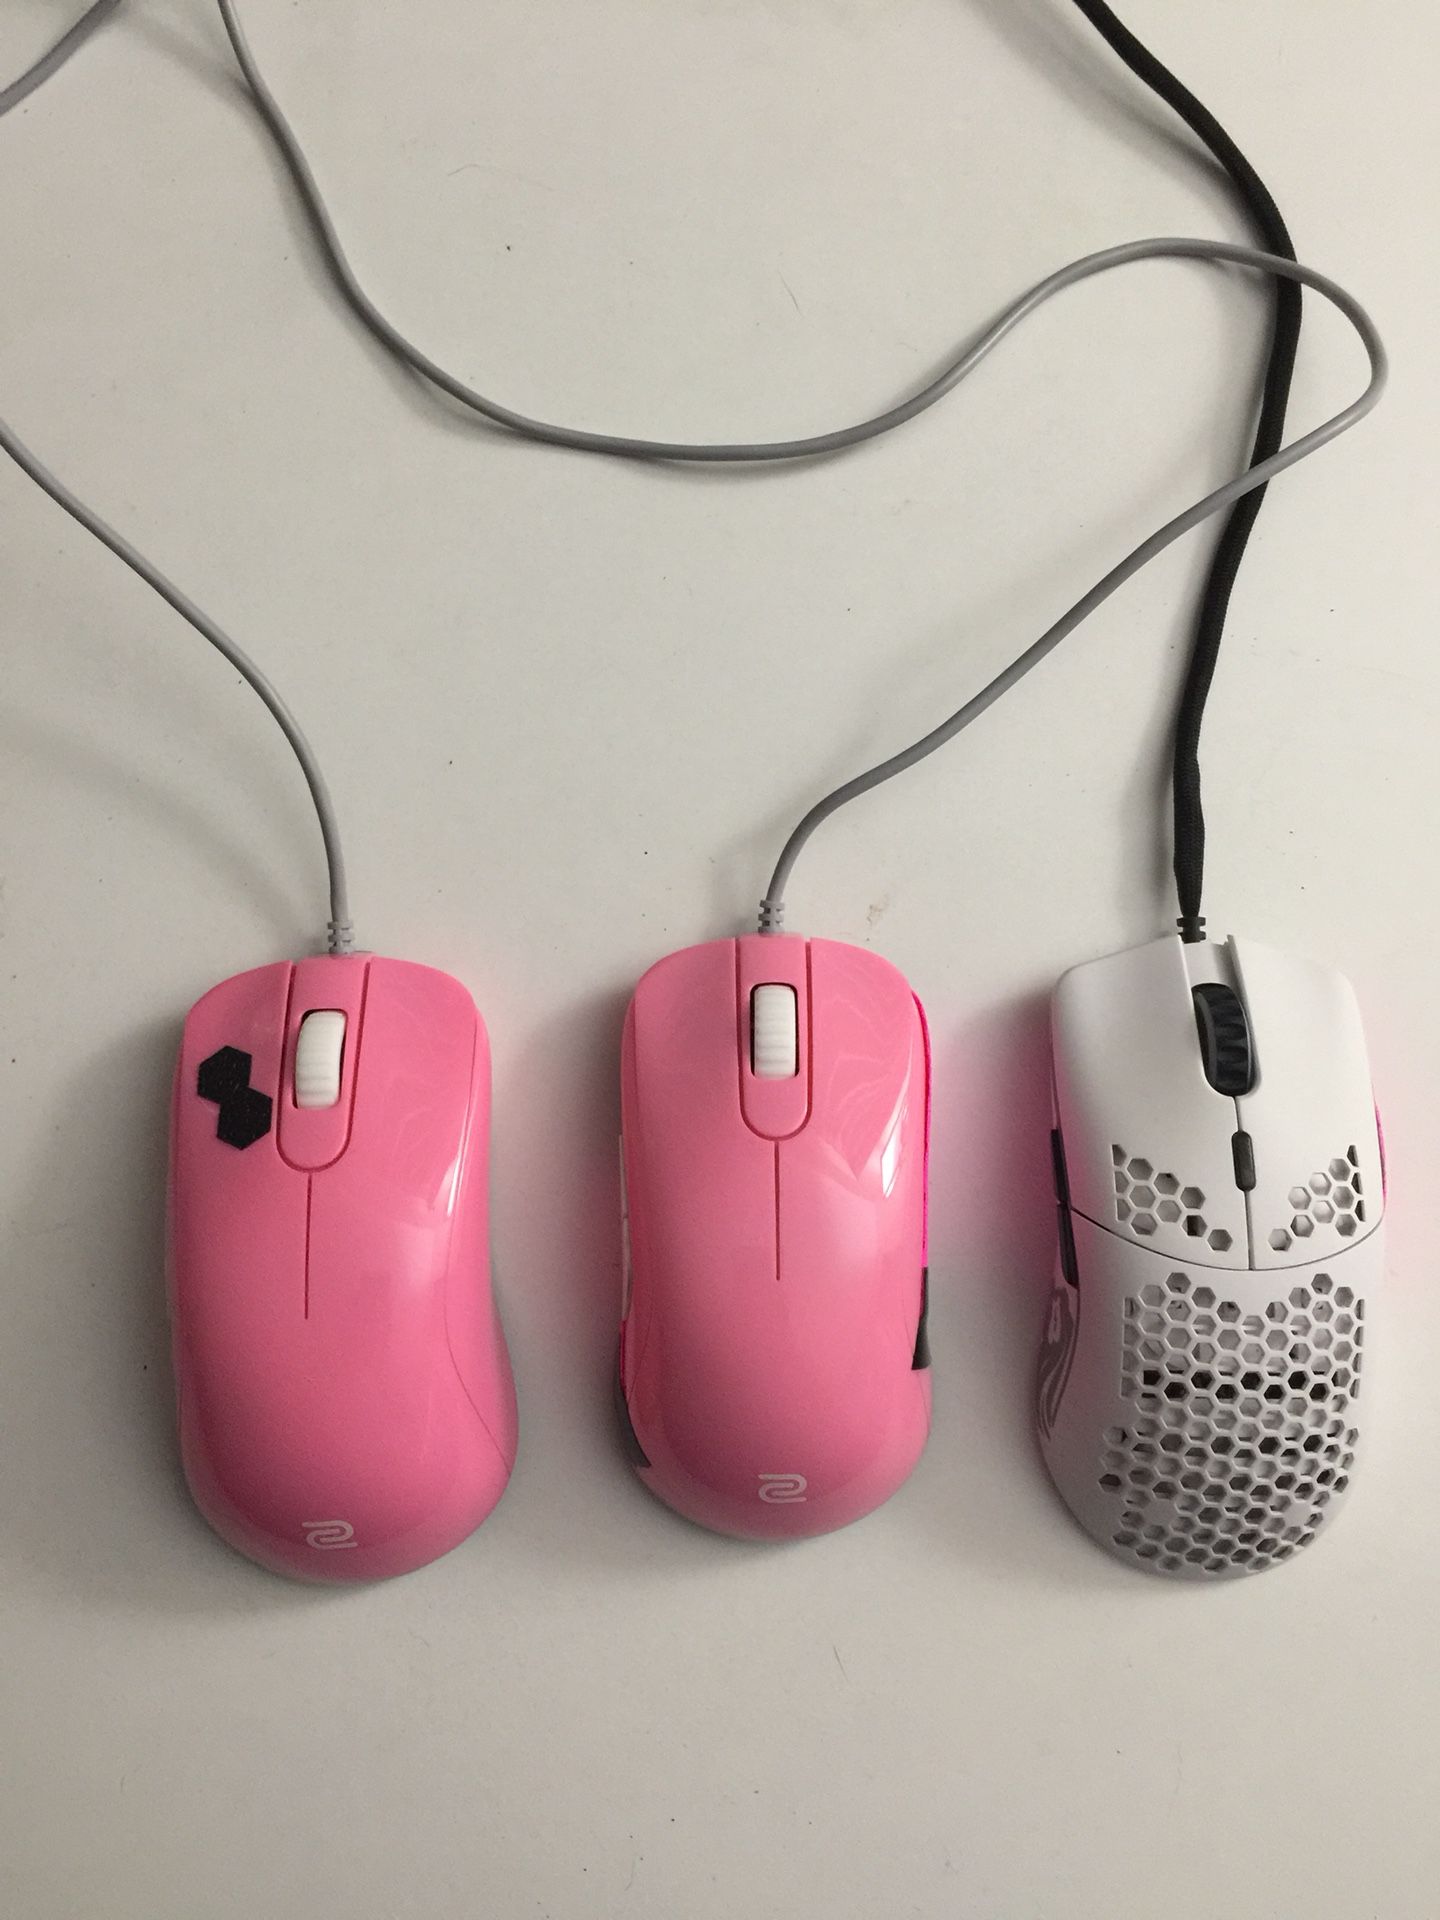 Zowie S1 S2 Divina and Model O